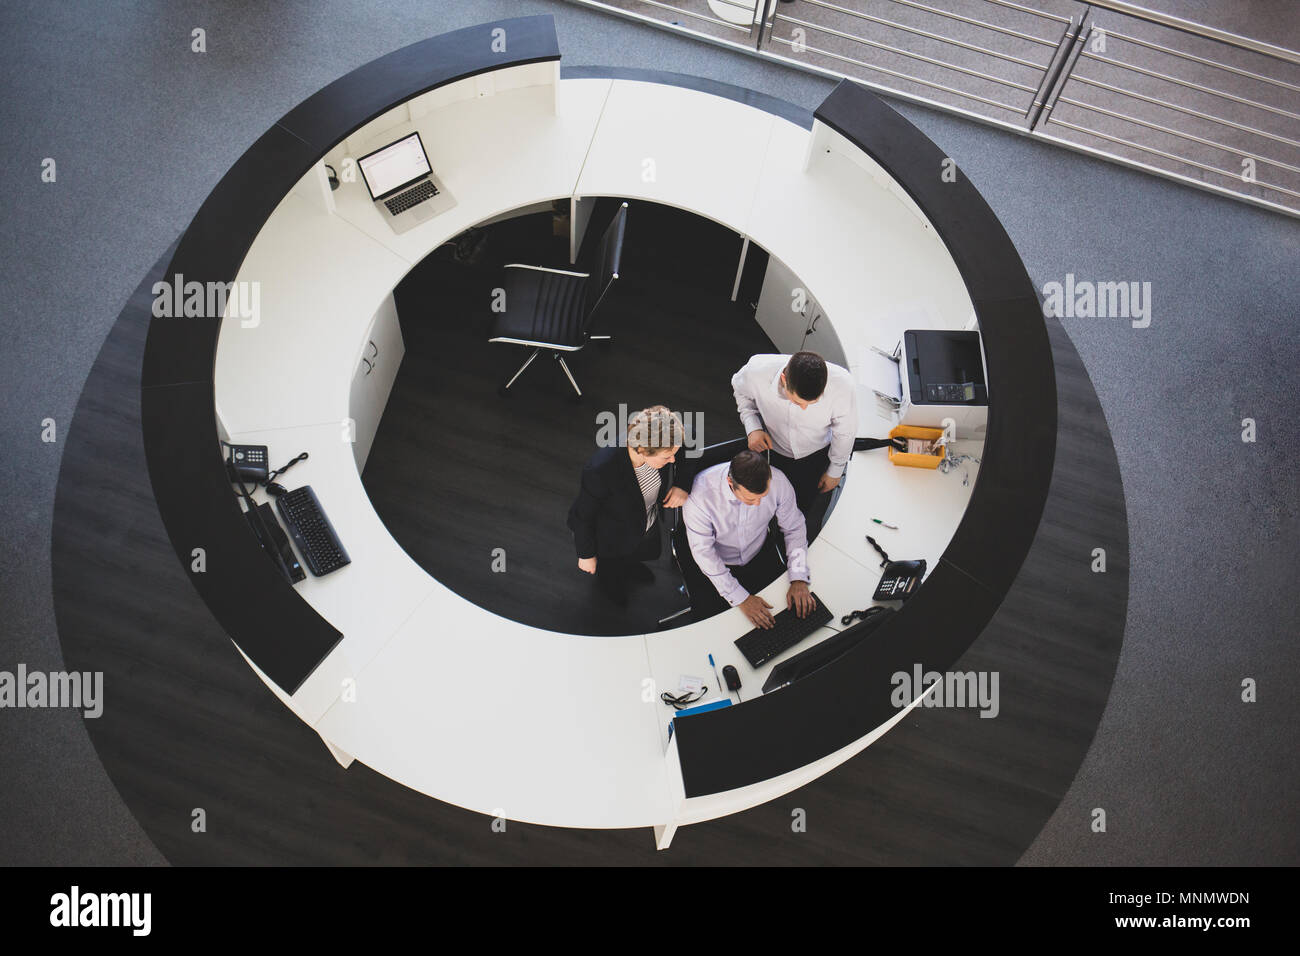 Overhead shot of people working in an office Stock Photo